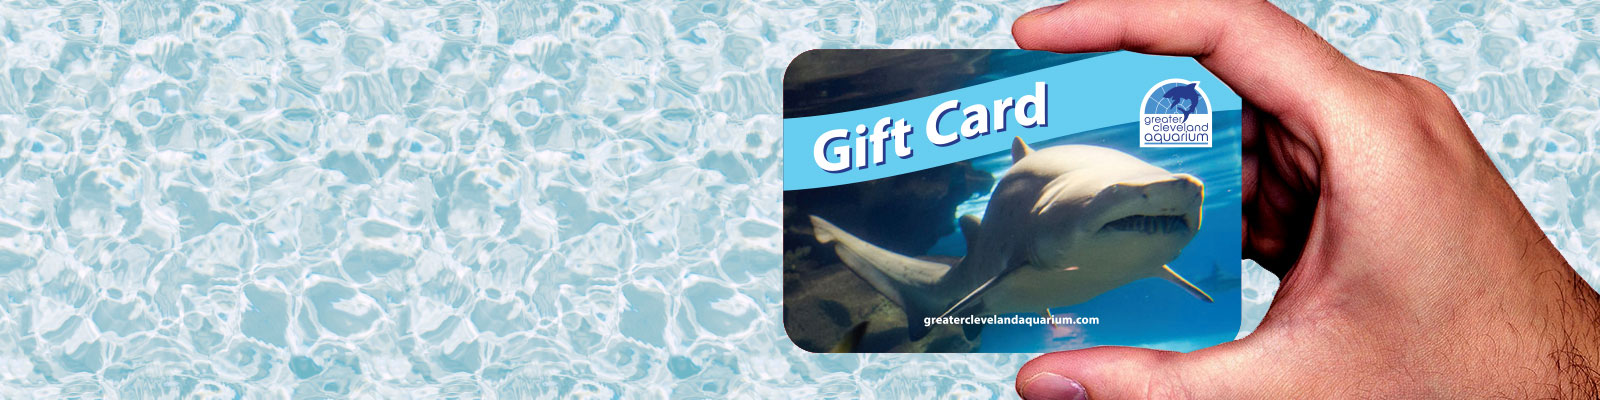 Gift Card for Greater Cleveland Aquarium